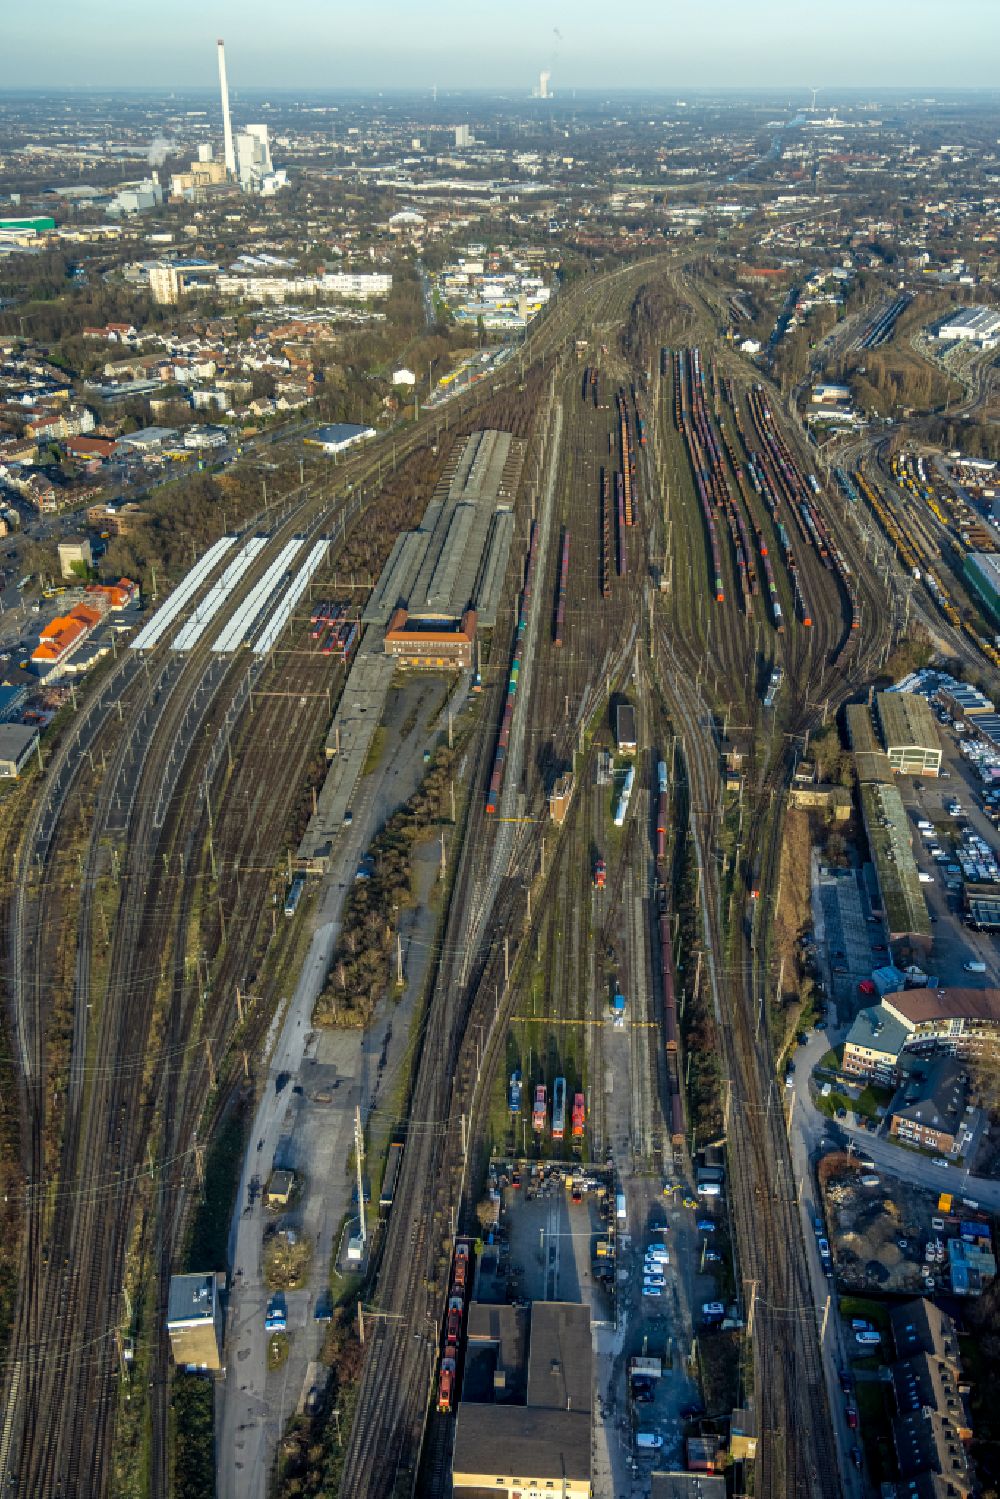 Aerial image Herne - tracks and rails at the Wanne-Eickel main station and the freight yard - marshalling yard of the Deutsche Bahn in Herne in the Ruhr area in the state of North Rhine-Westphalia